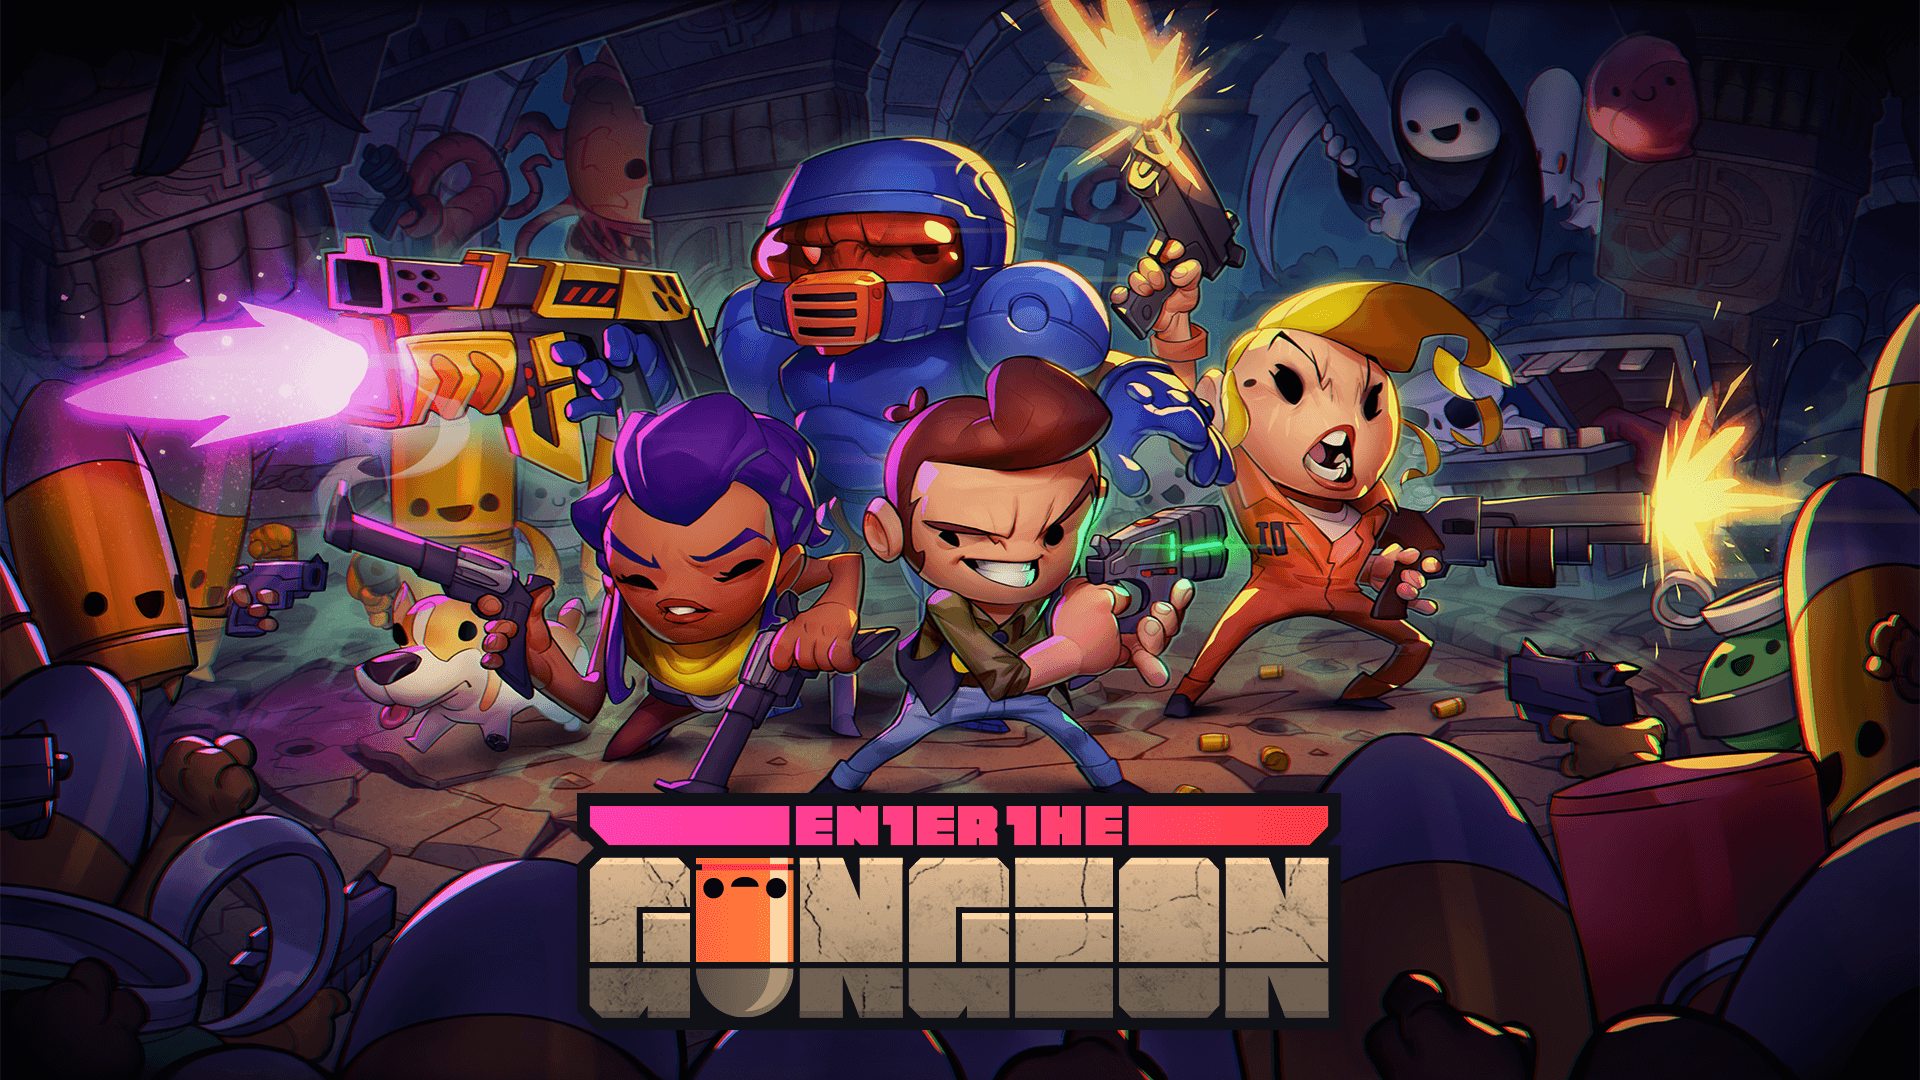 http://www.cosmocover.com/wp-content/uploads/2016/03/Enter-the-Gungeon-Key-Art_Combined.png